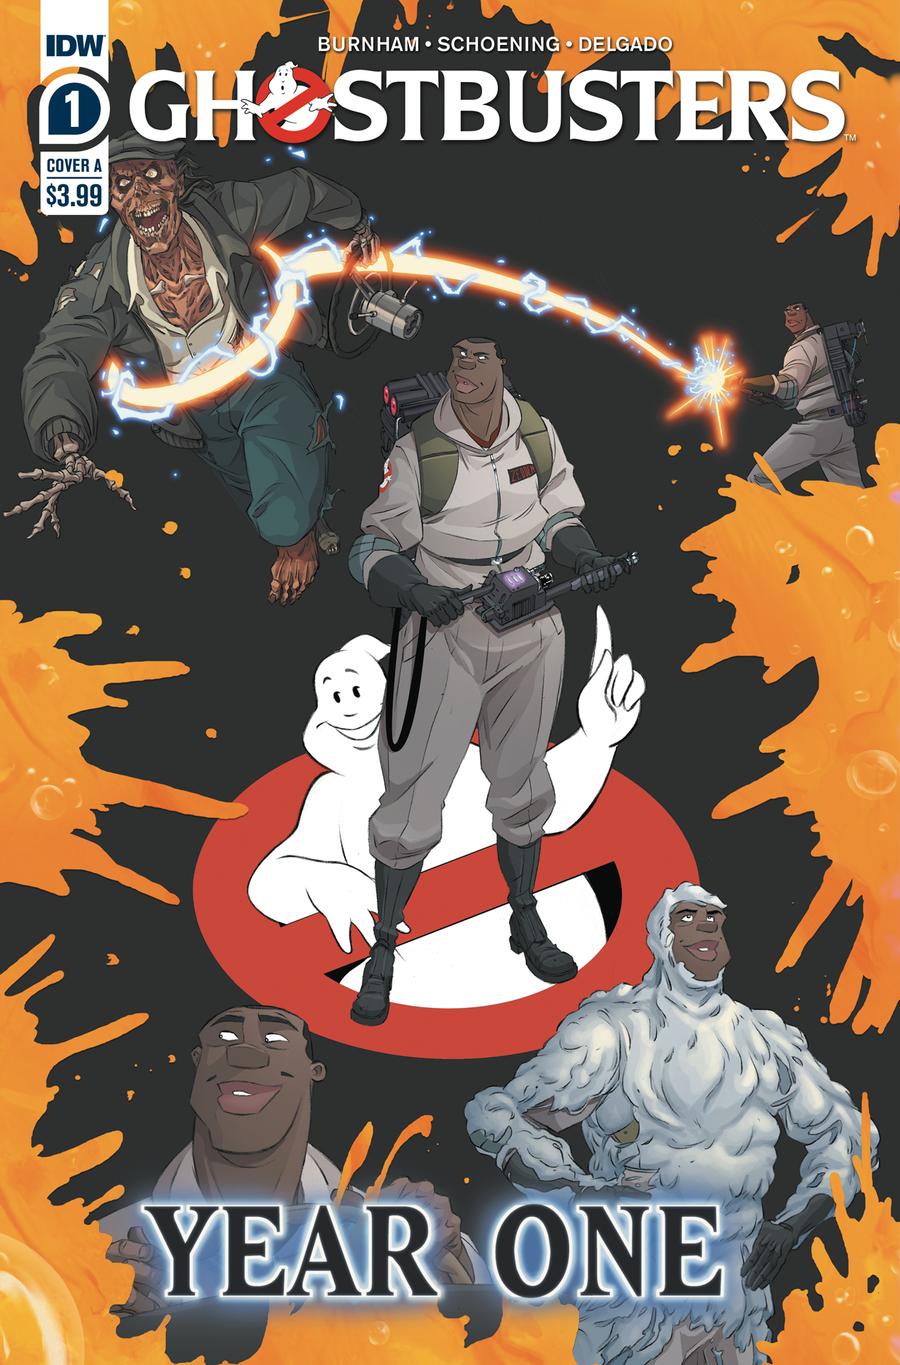 Ghostbusters Year One #1 Cover A Regular Dan Schoening Cover